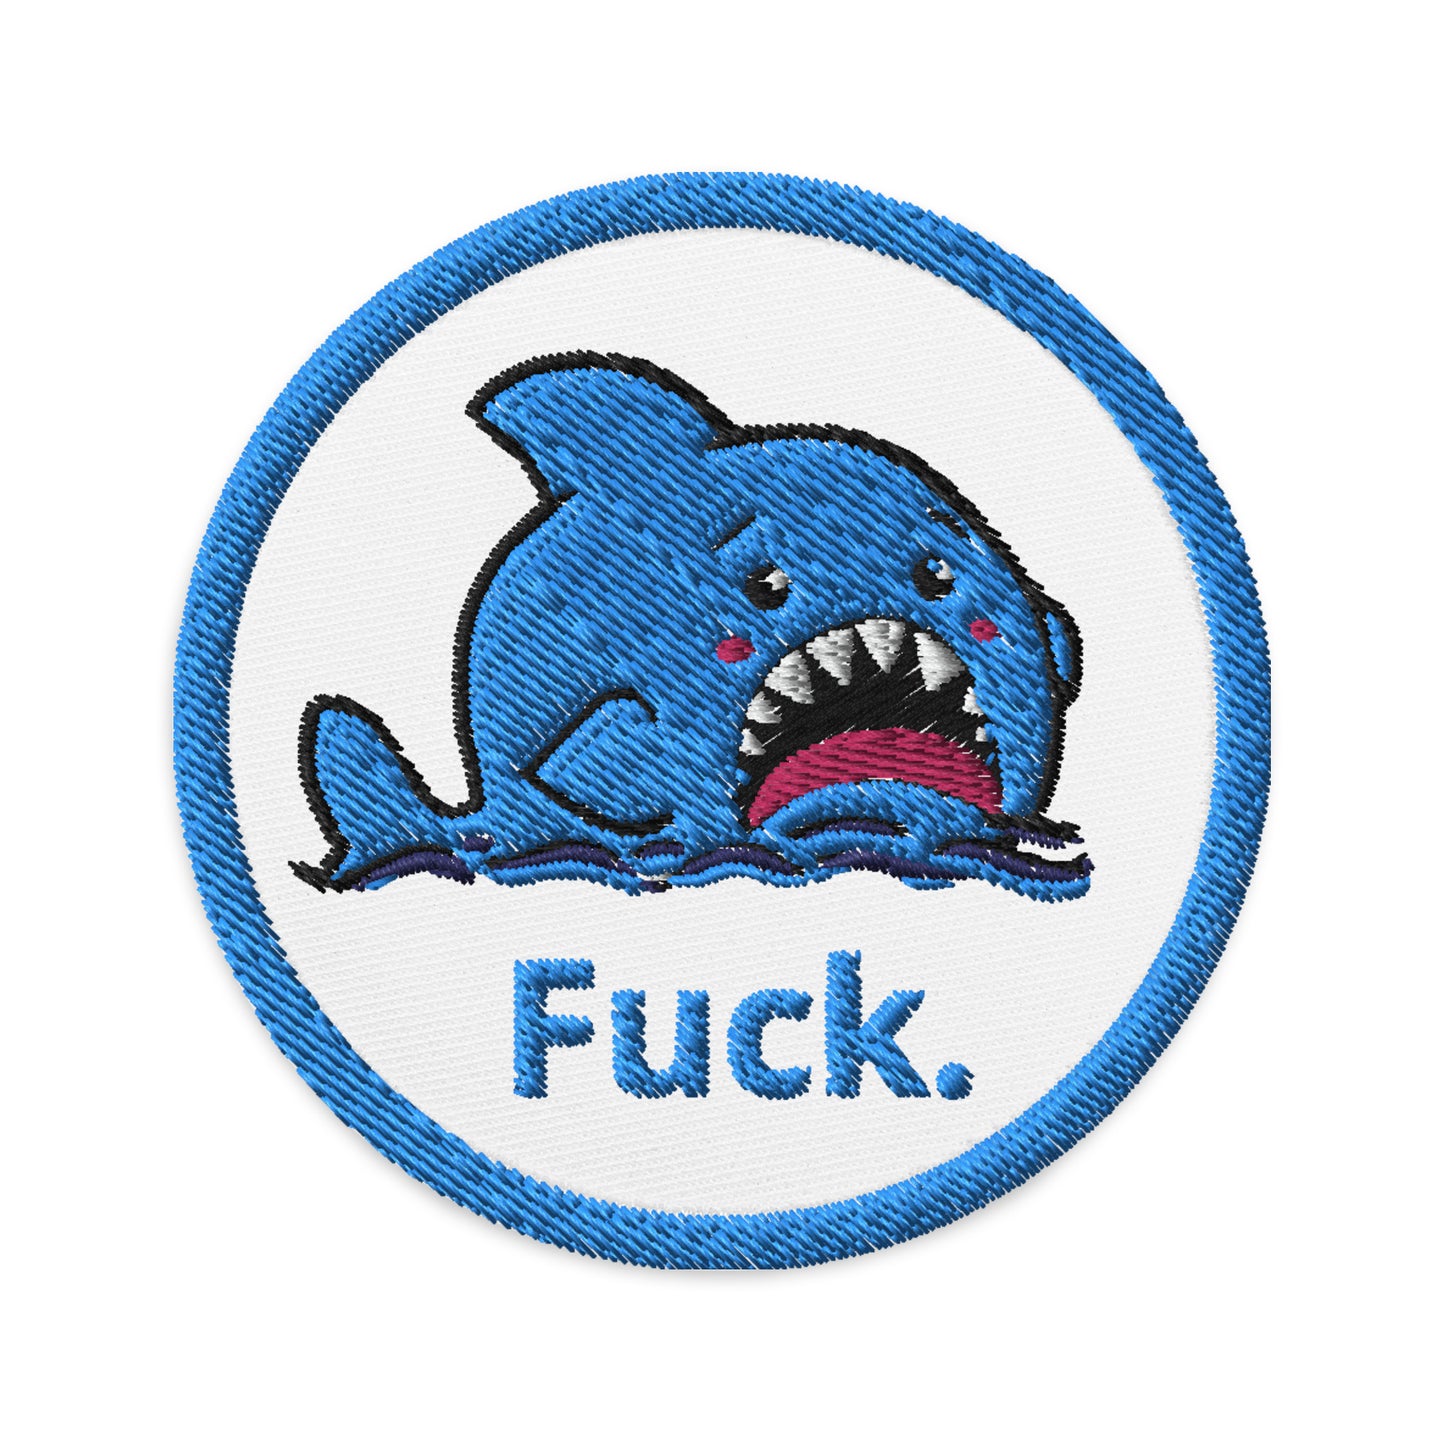 Anxious Shark Embroidered Patches